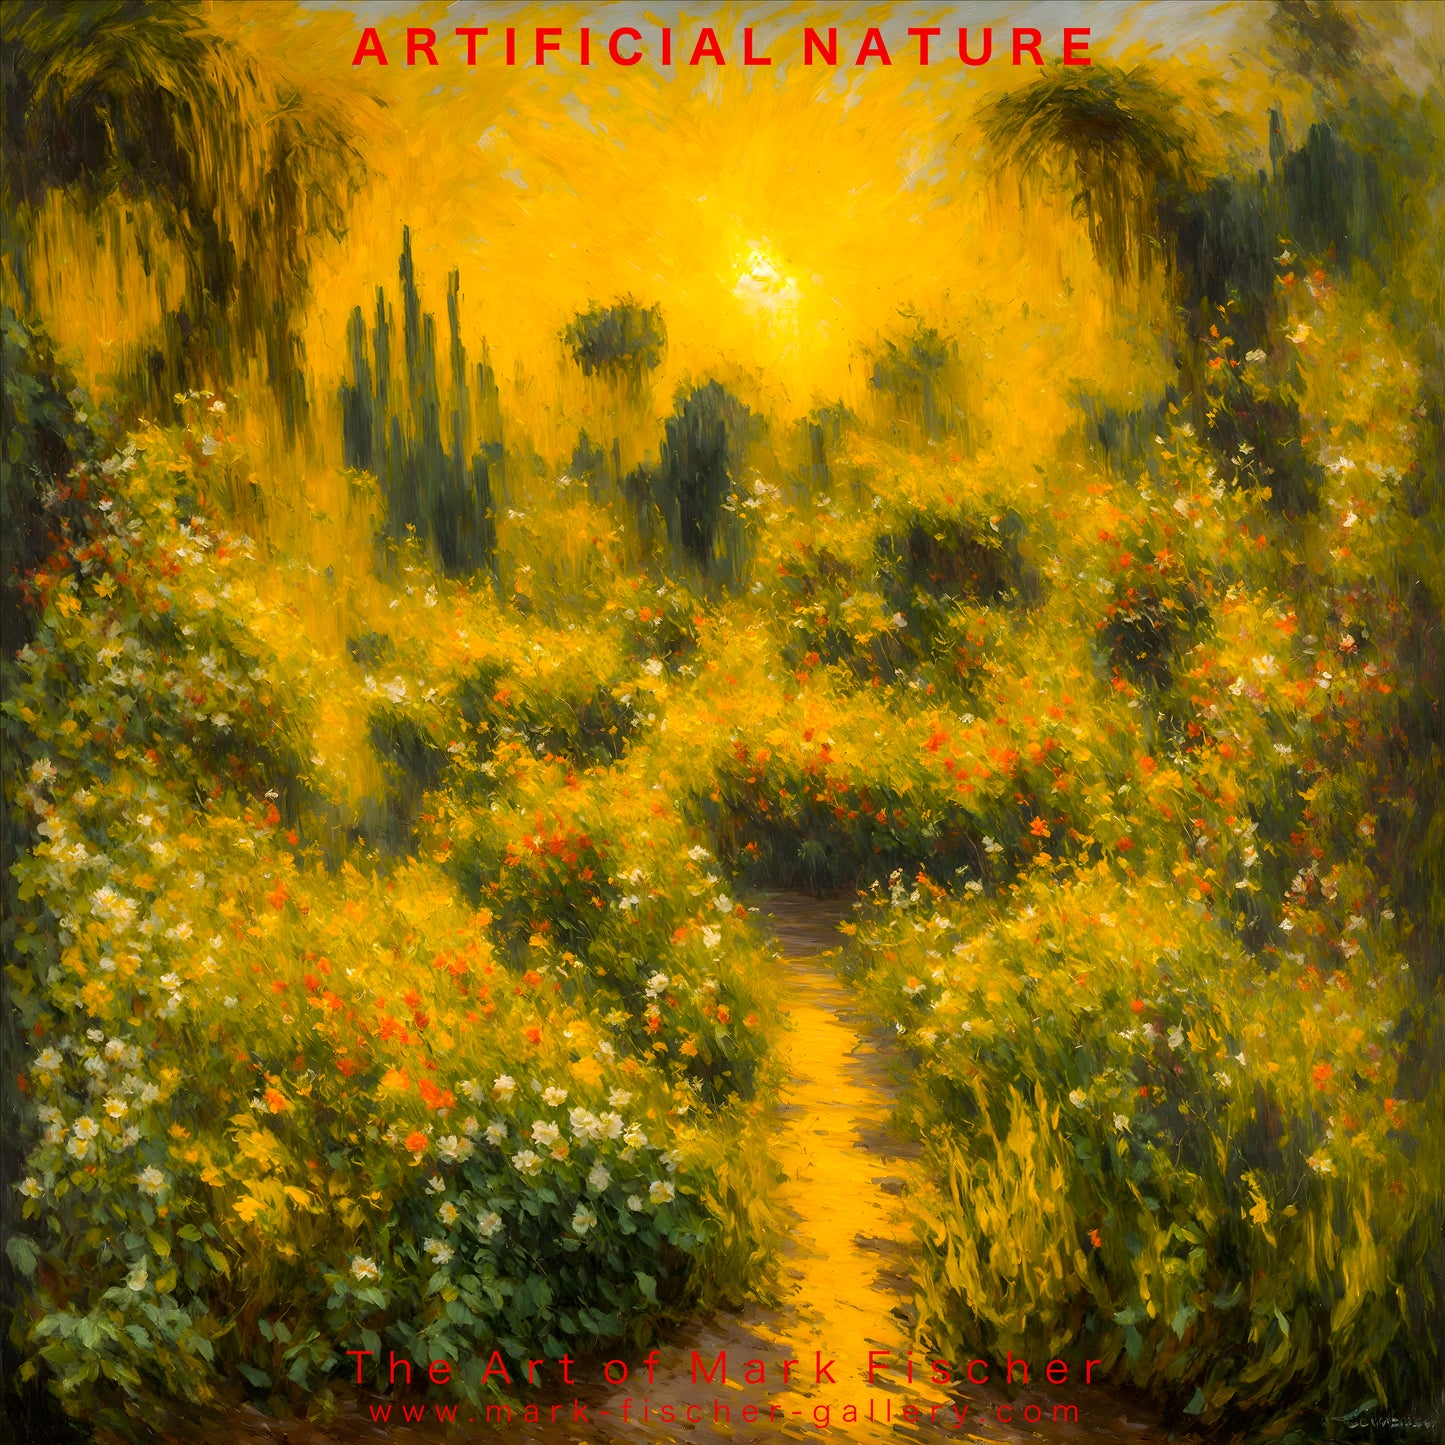 ARTIFICIAL NATURE - Poster